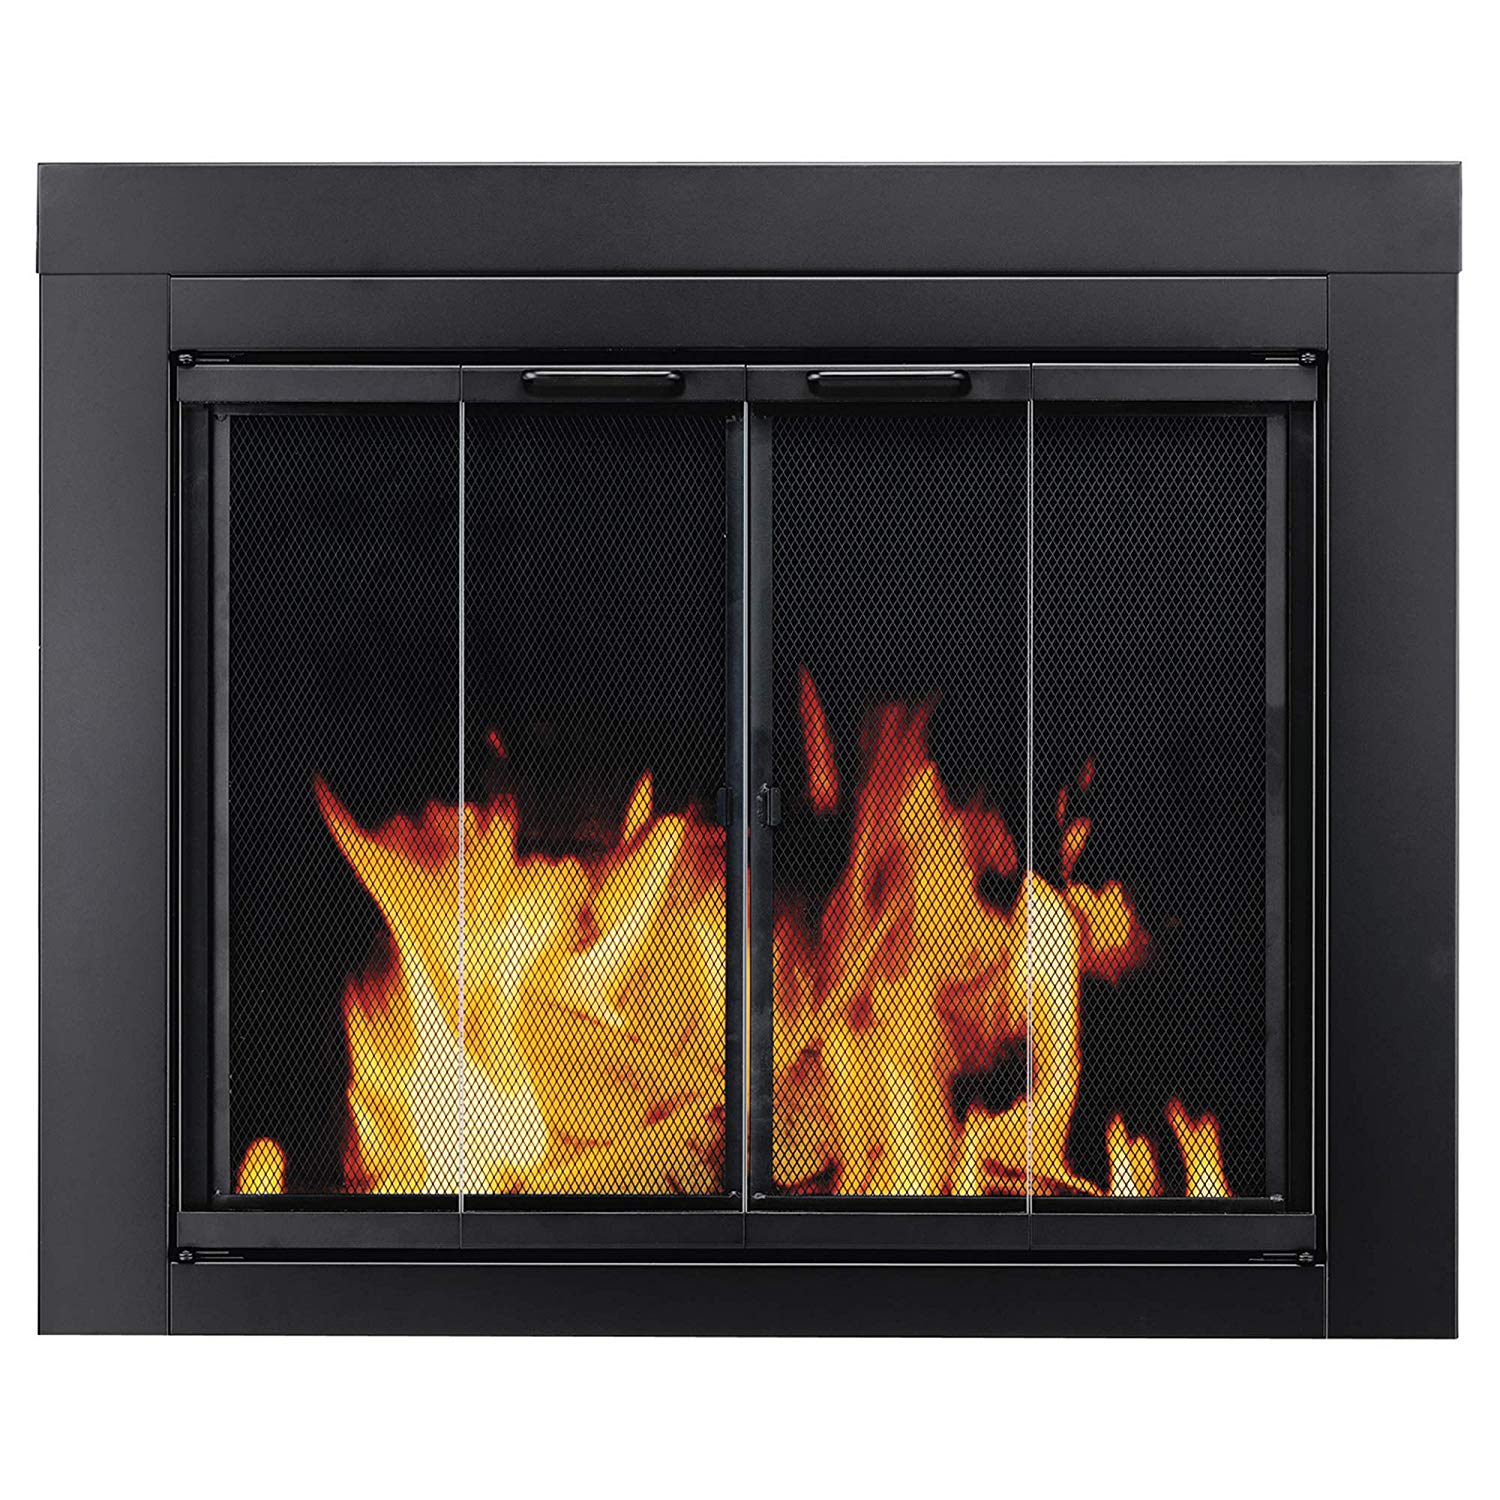 How to Put Out A Fireplace Fire Lovely Pleasant Hearth at 1000 ascot Fireplace Glass Door Black Small